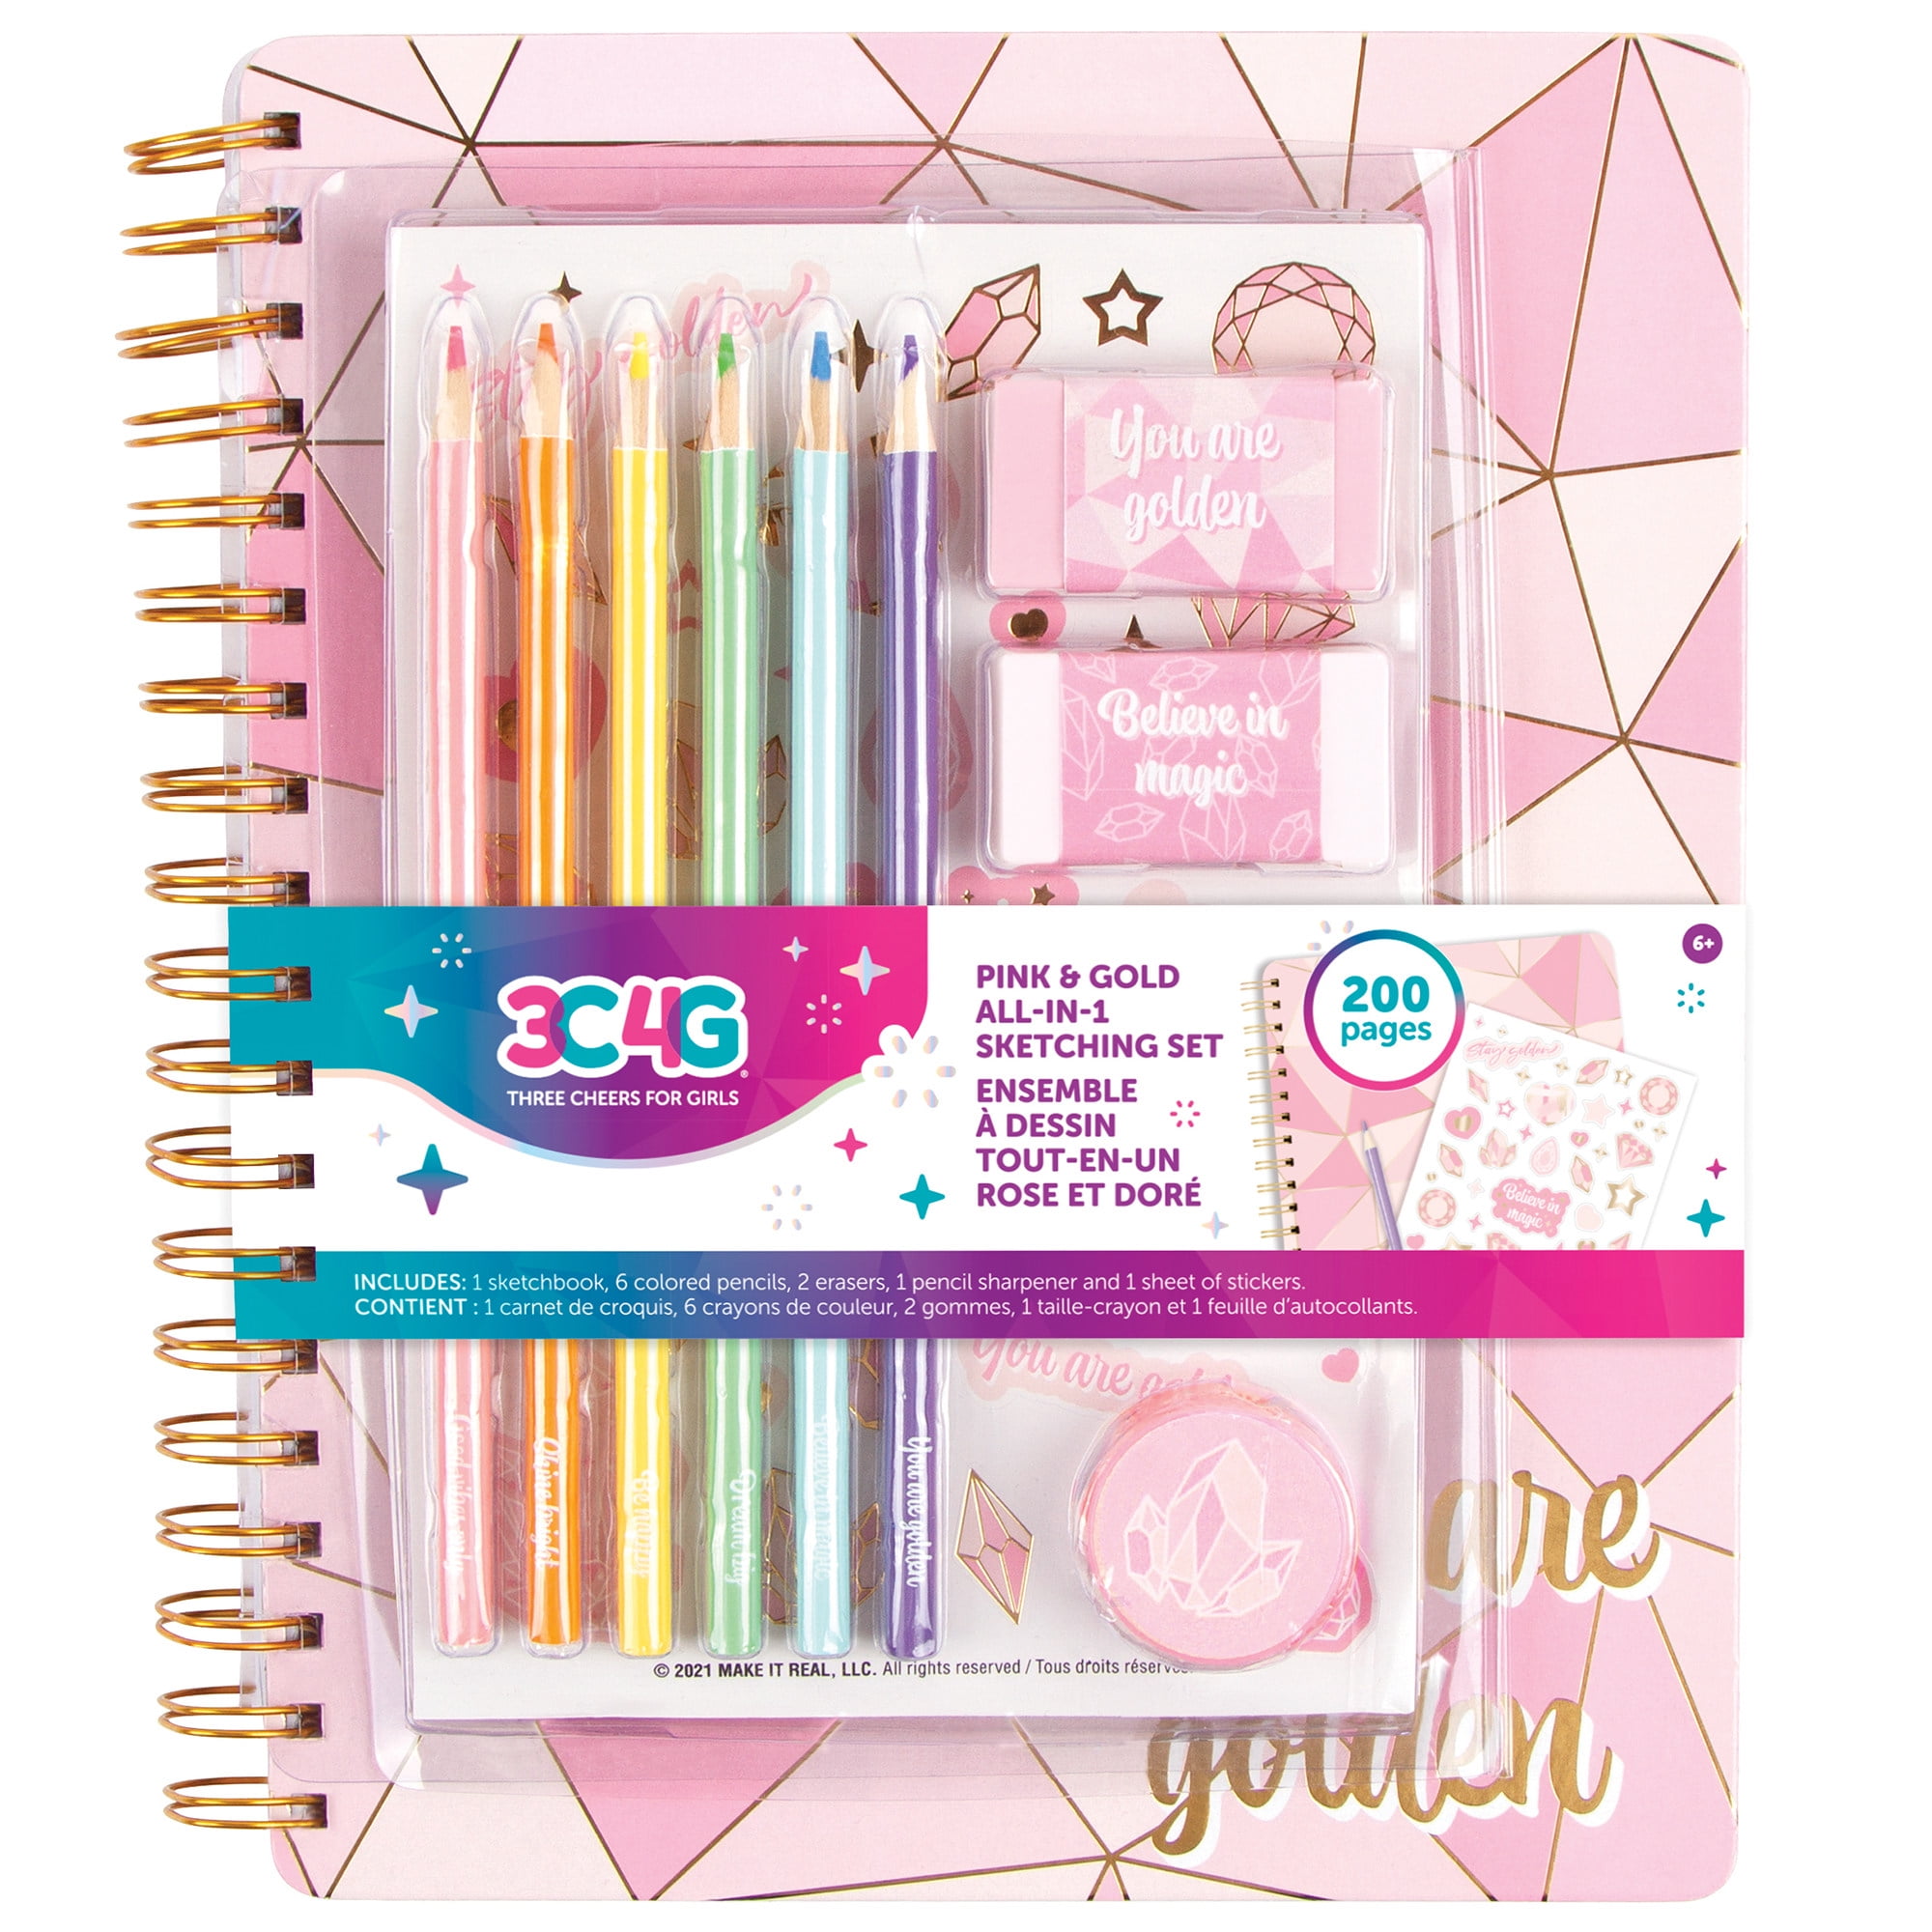 Three Cheers for Girls - Pink & Gold All-in-1 Sketchbook Set - Girls Diary,  Journal, Sketch Book for Kids w/Pencils, Stickers & More - Drawing Kit for